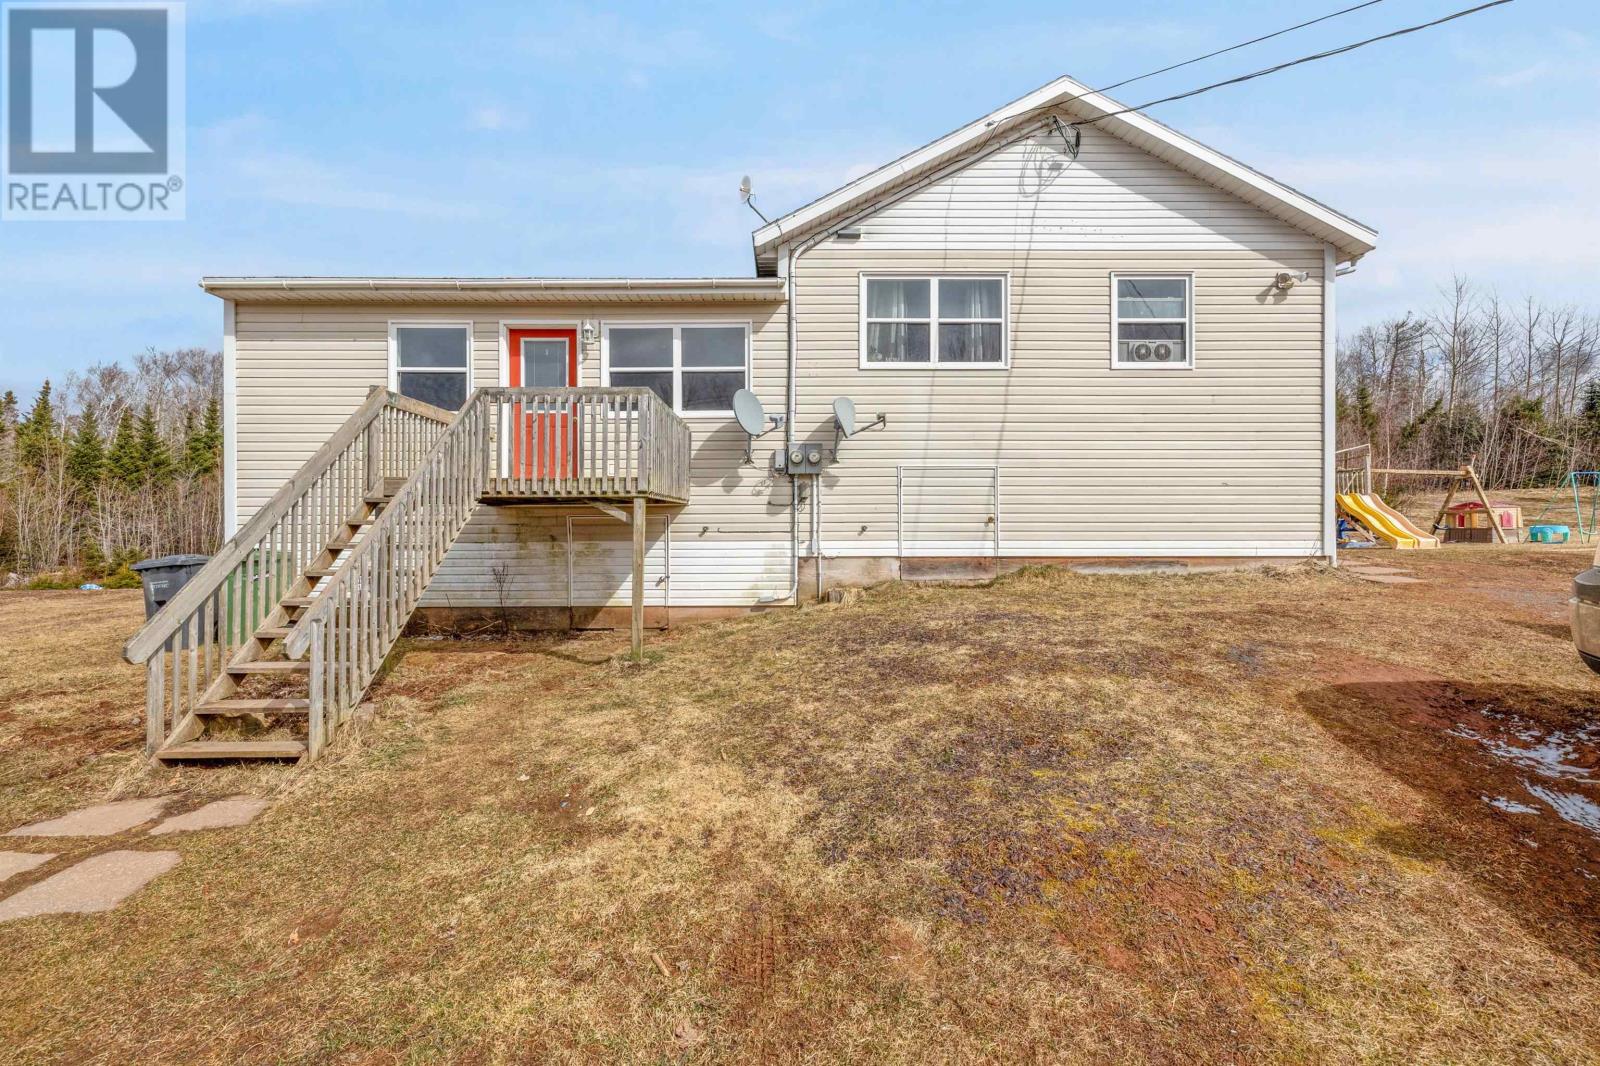 5825/5827 Campbell Road, Victoria Cross, Montague, Prince Edward Island  C0A 1R0 - Photo 2 - 202405403